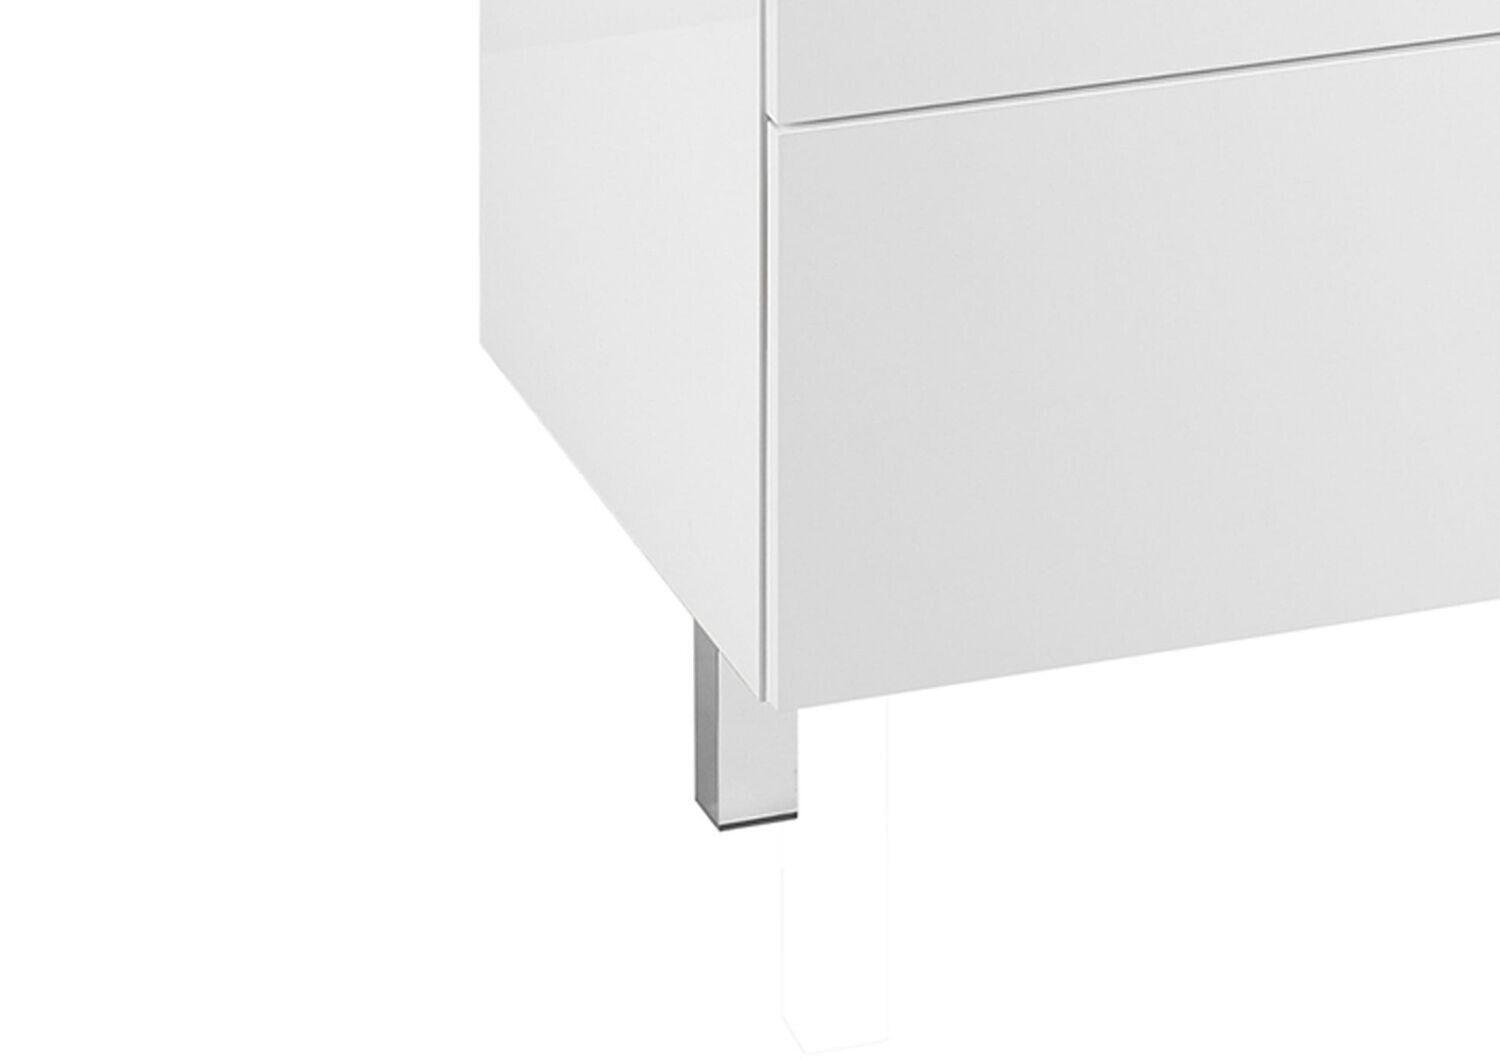 Roca Victoria-N Optional Legs for 3 Drawer Units (Pair) 110mm High - Chrome 816555001 LEGS ONLY